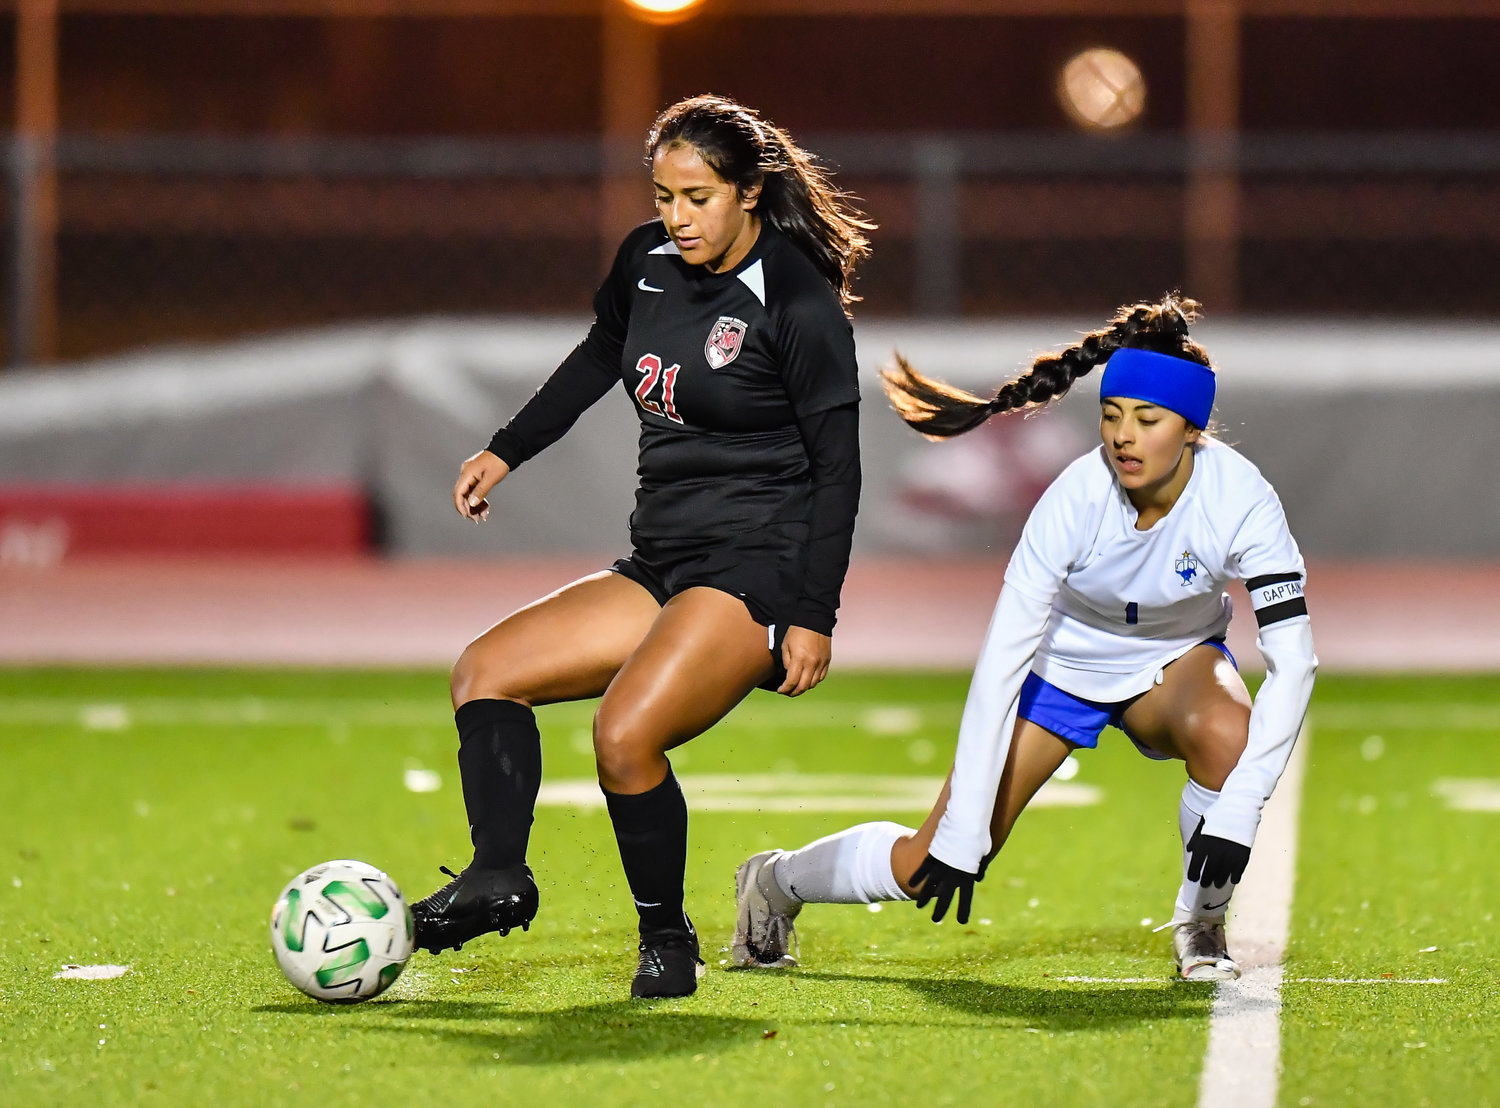 March 8, 2022: Katy's Ashley Albornoz #21sets up for the pass during the Katy vs Katy Taylor soccer match at KHS. (Photo by Mark Goodman / Katy Times)